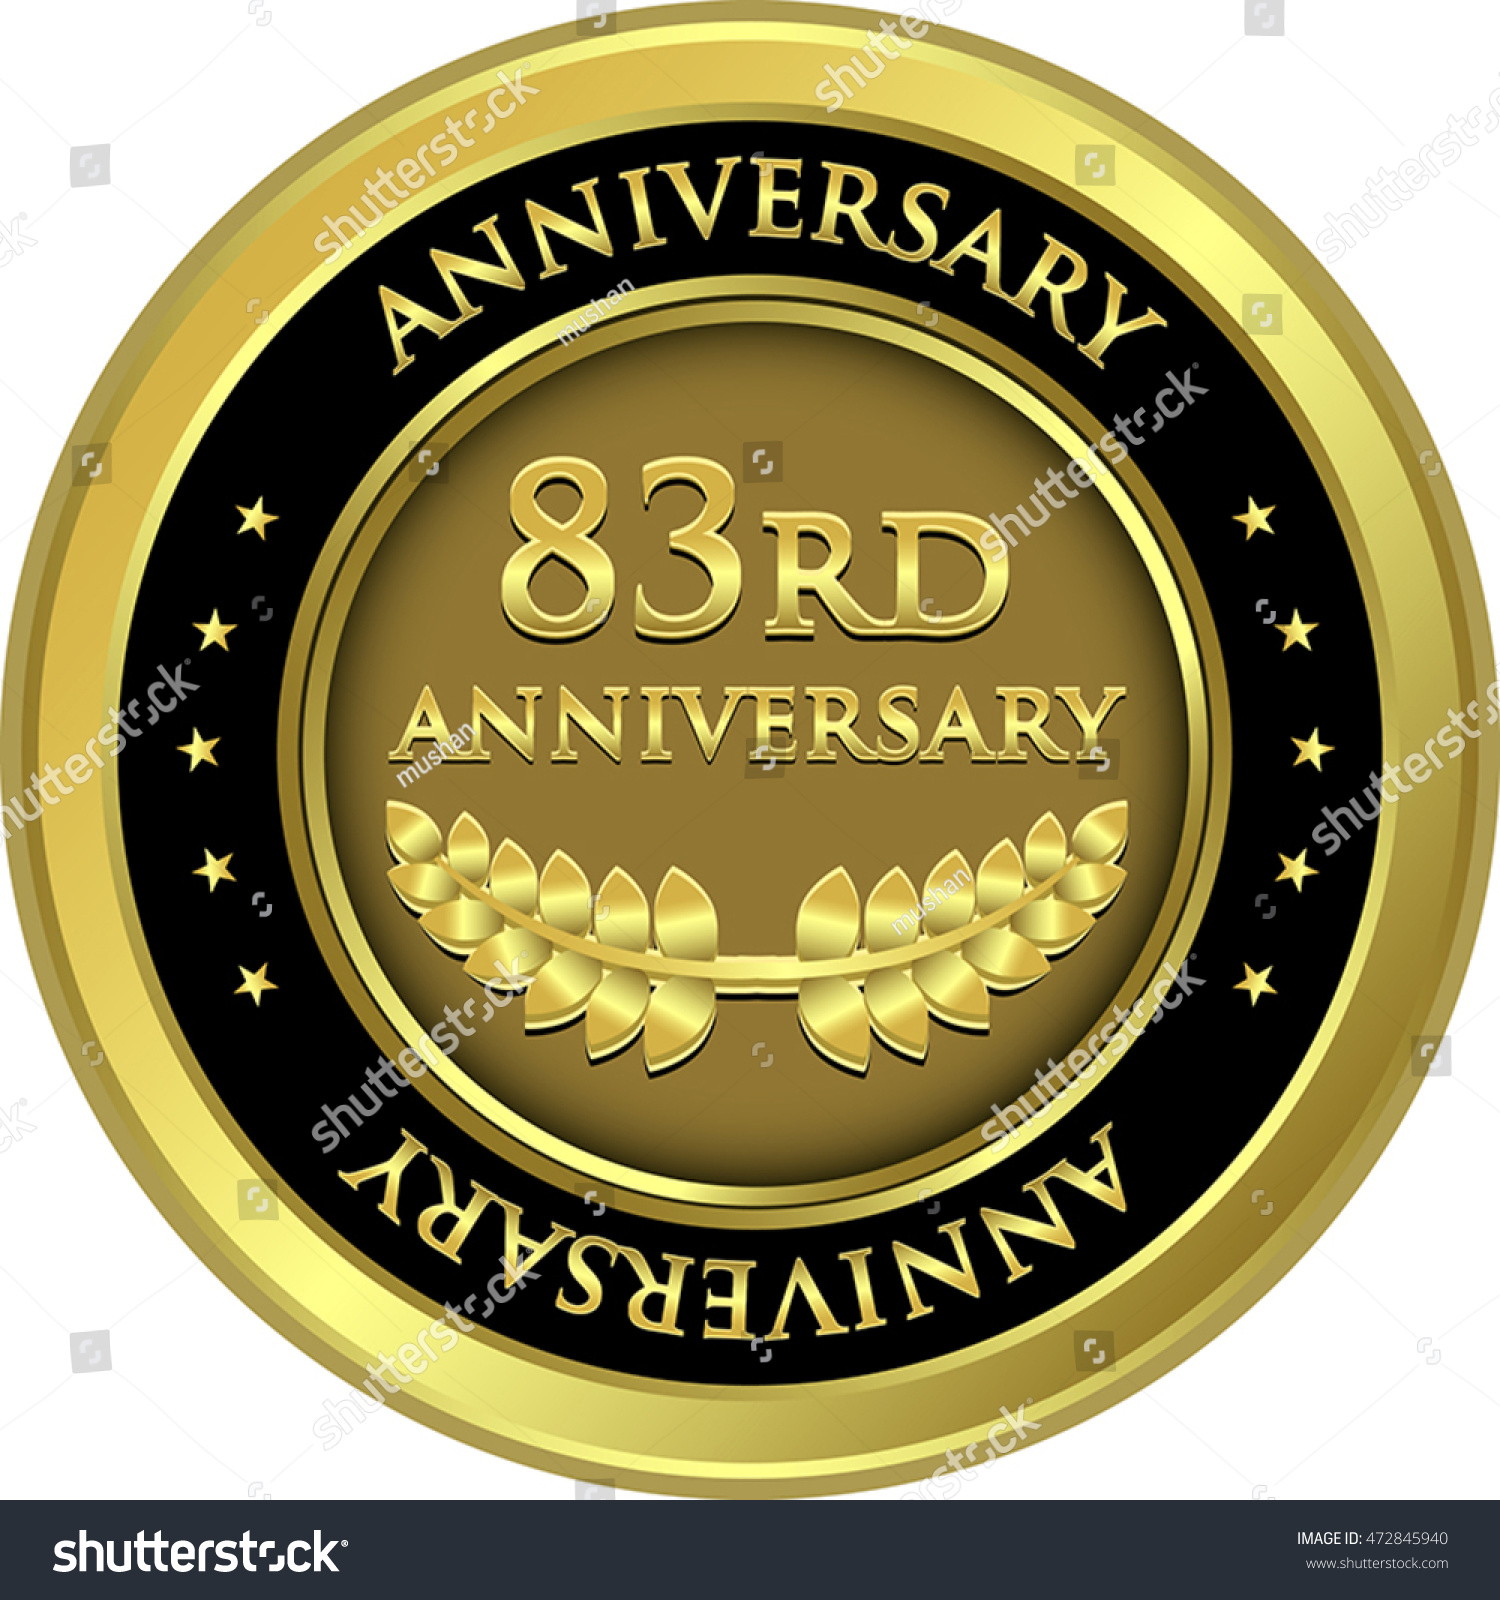 Eighty Third Anniversary Gold Medal - Royalty Free Stock Vector ...